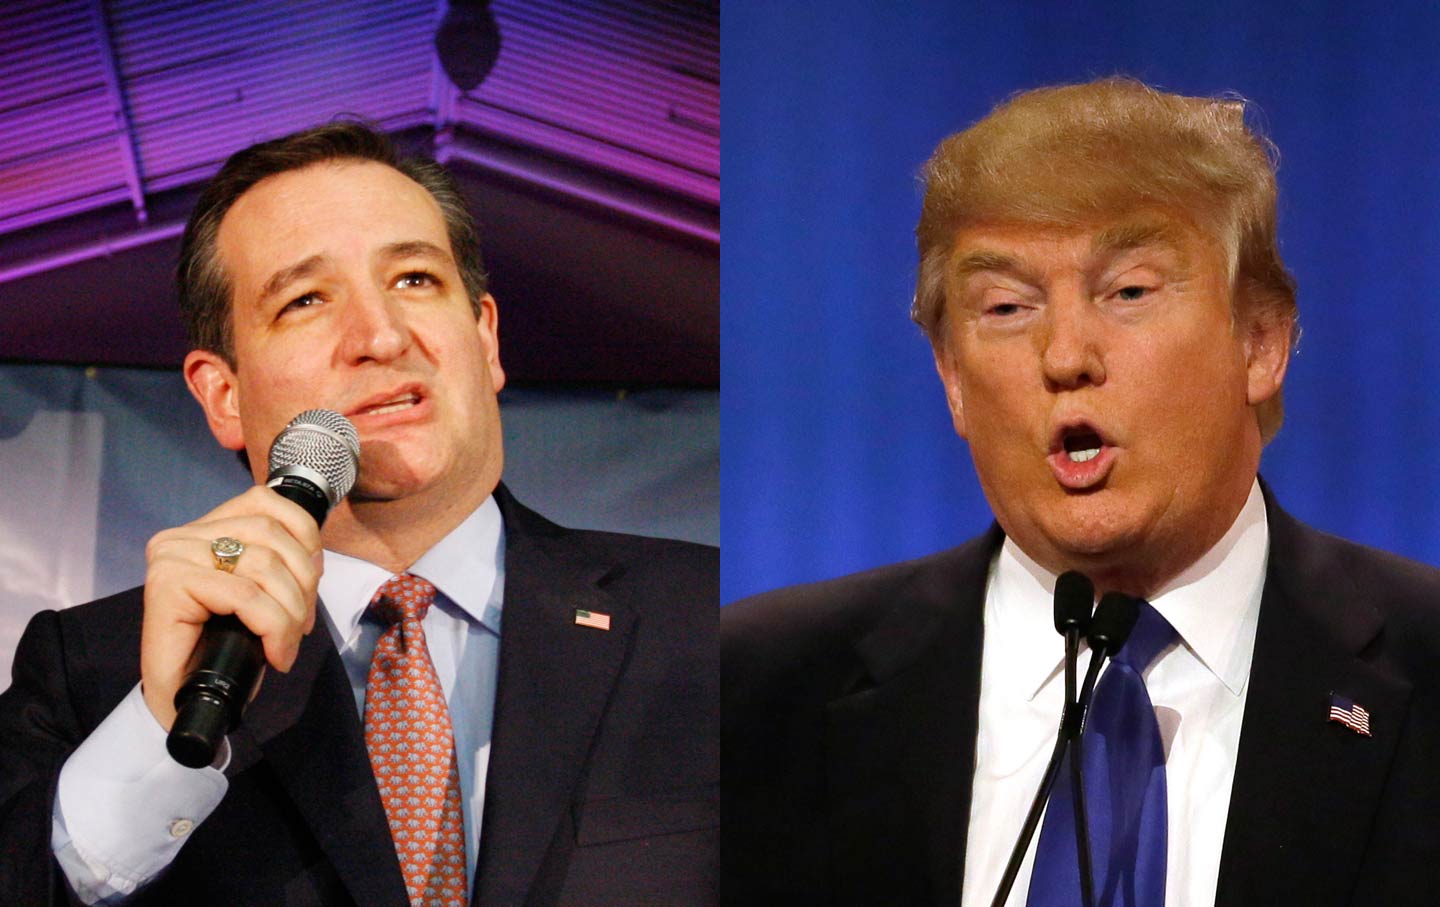 Imagine How President Donald Trump or Ted Cruz Would Respond to the Brussels Attacks